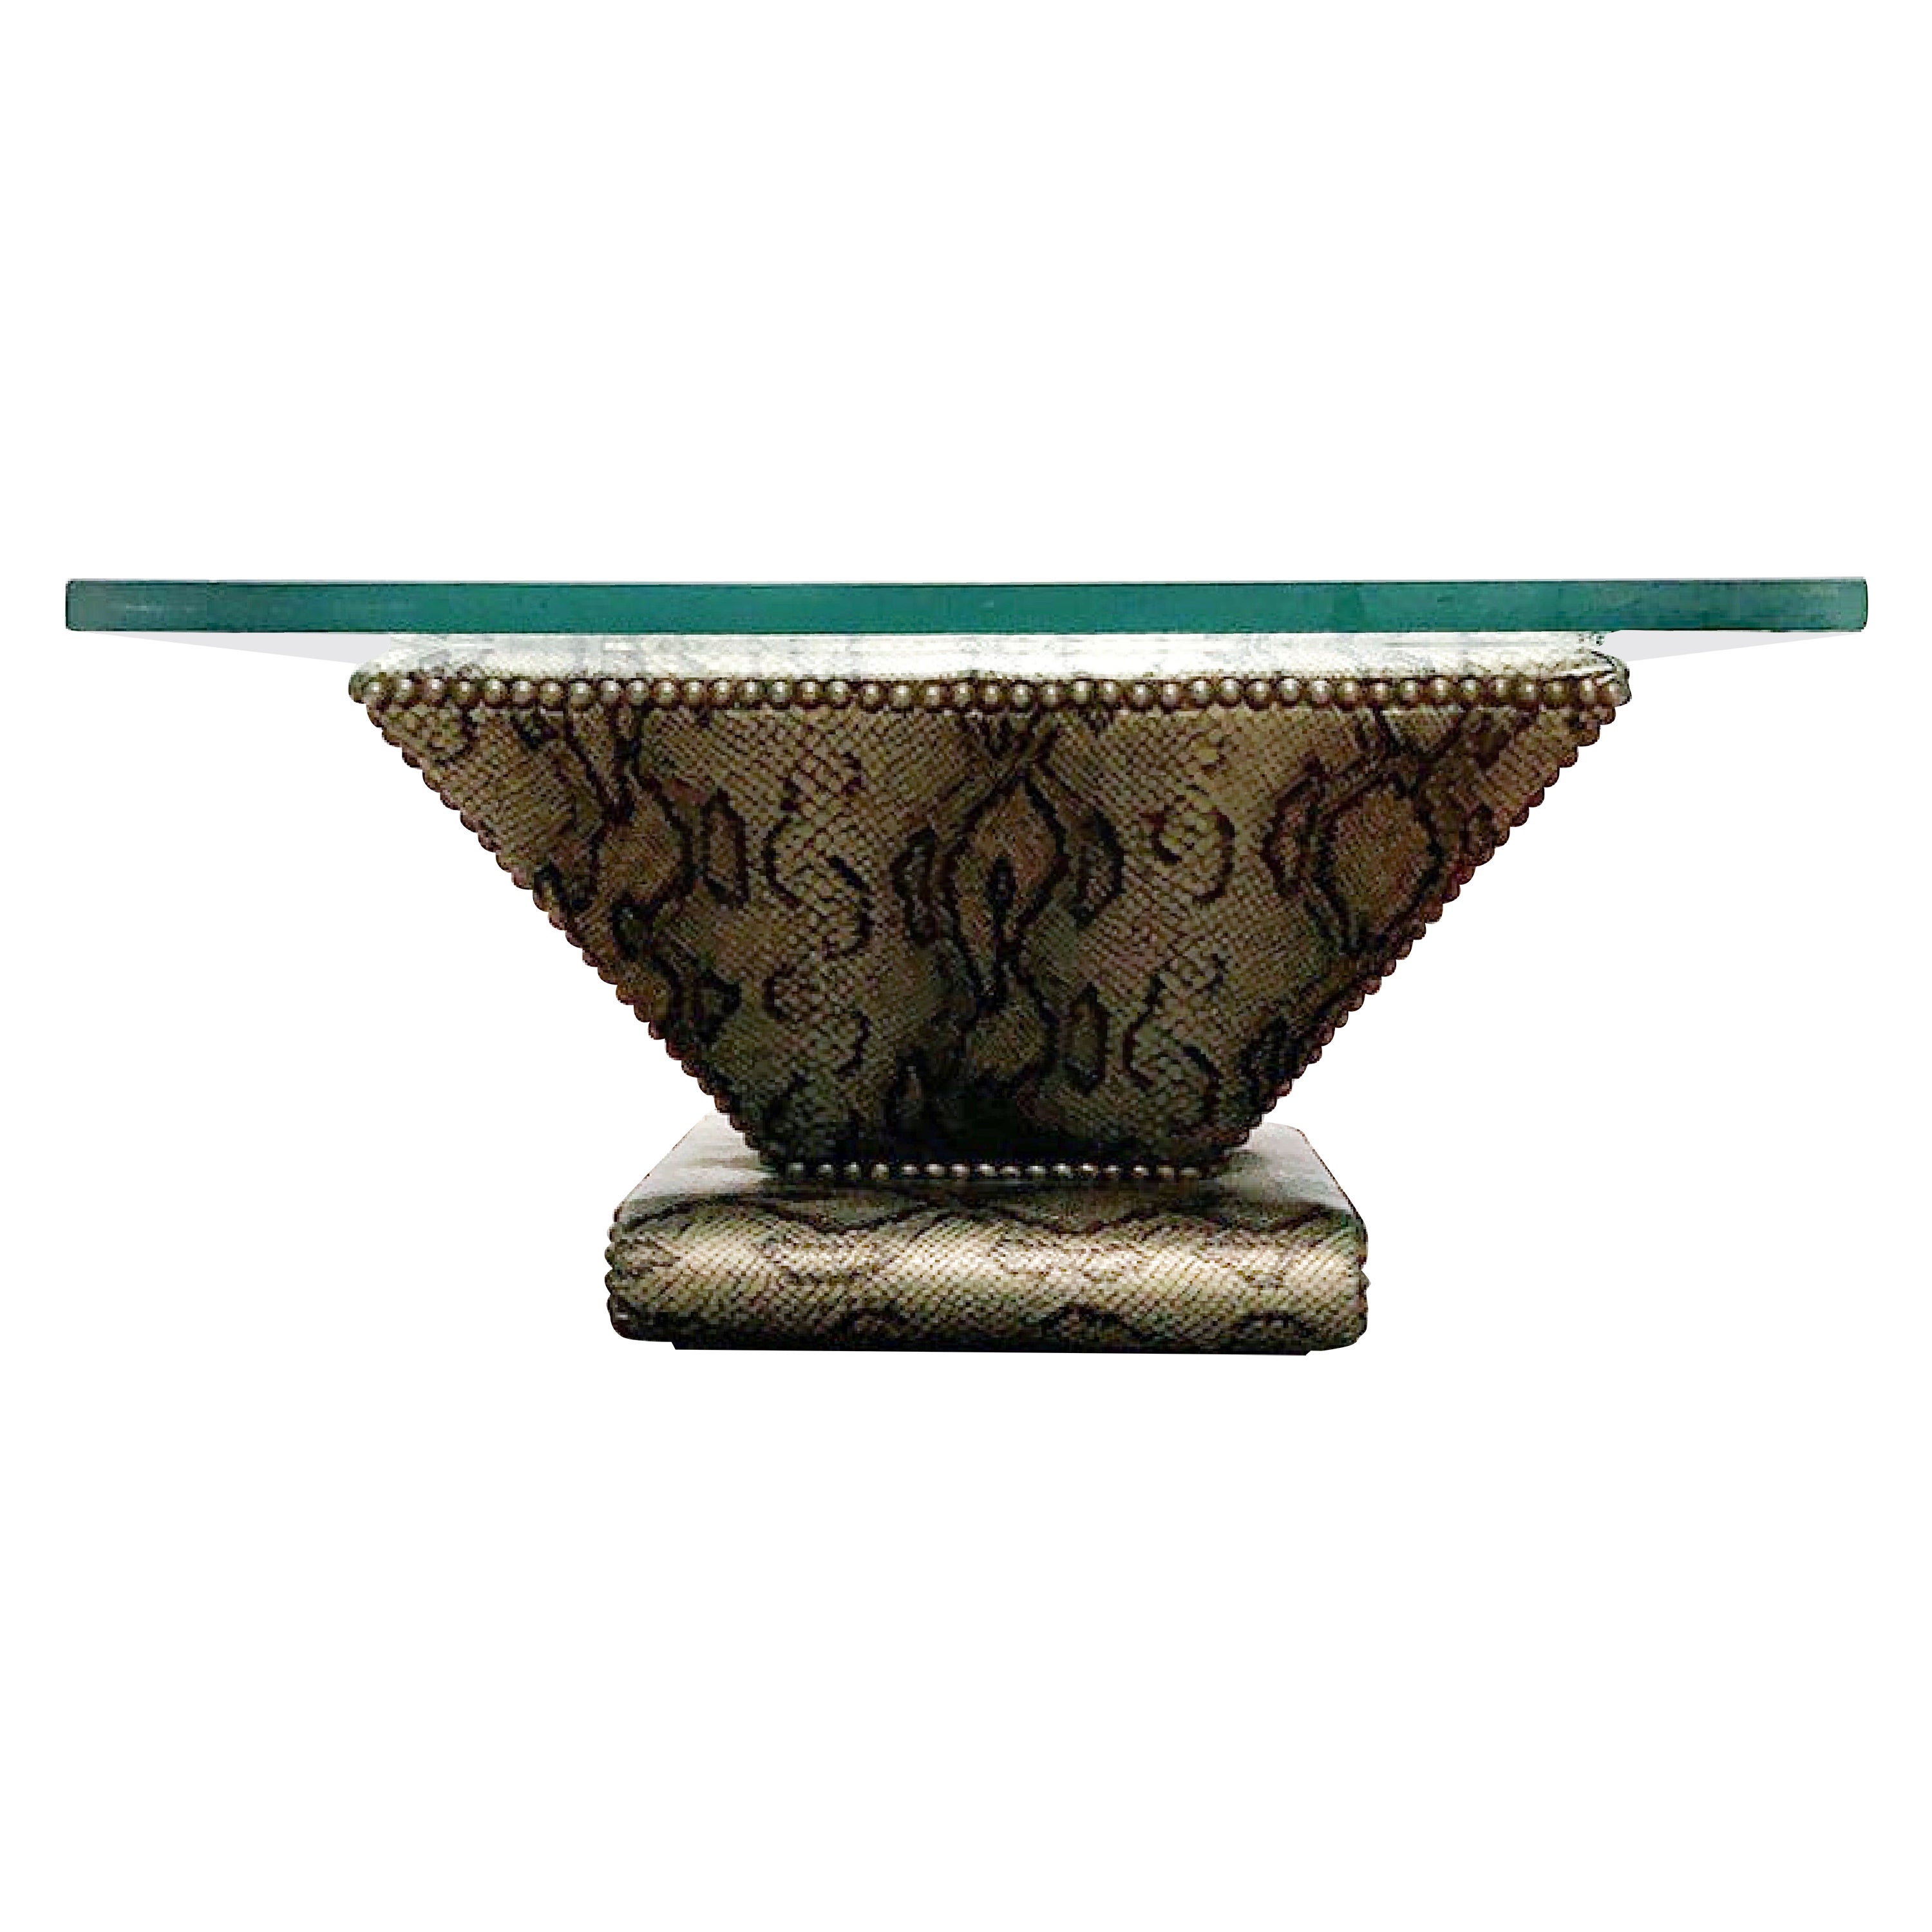 Karl Springer Snake-textured leather (or leatherette) and bronze Regency modern cocktail table. This is an original Karl Springer piece and retains its 